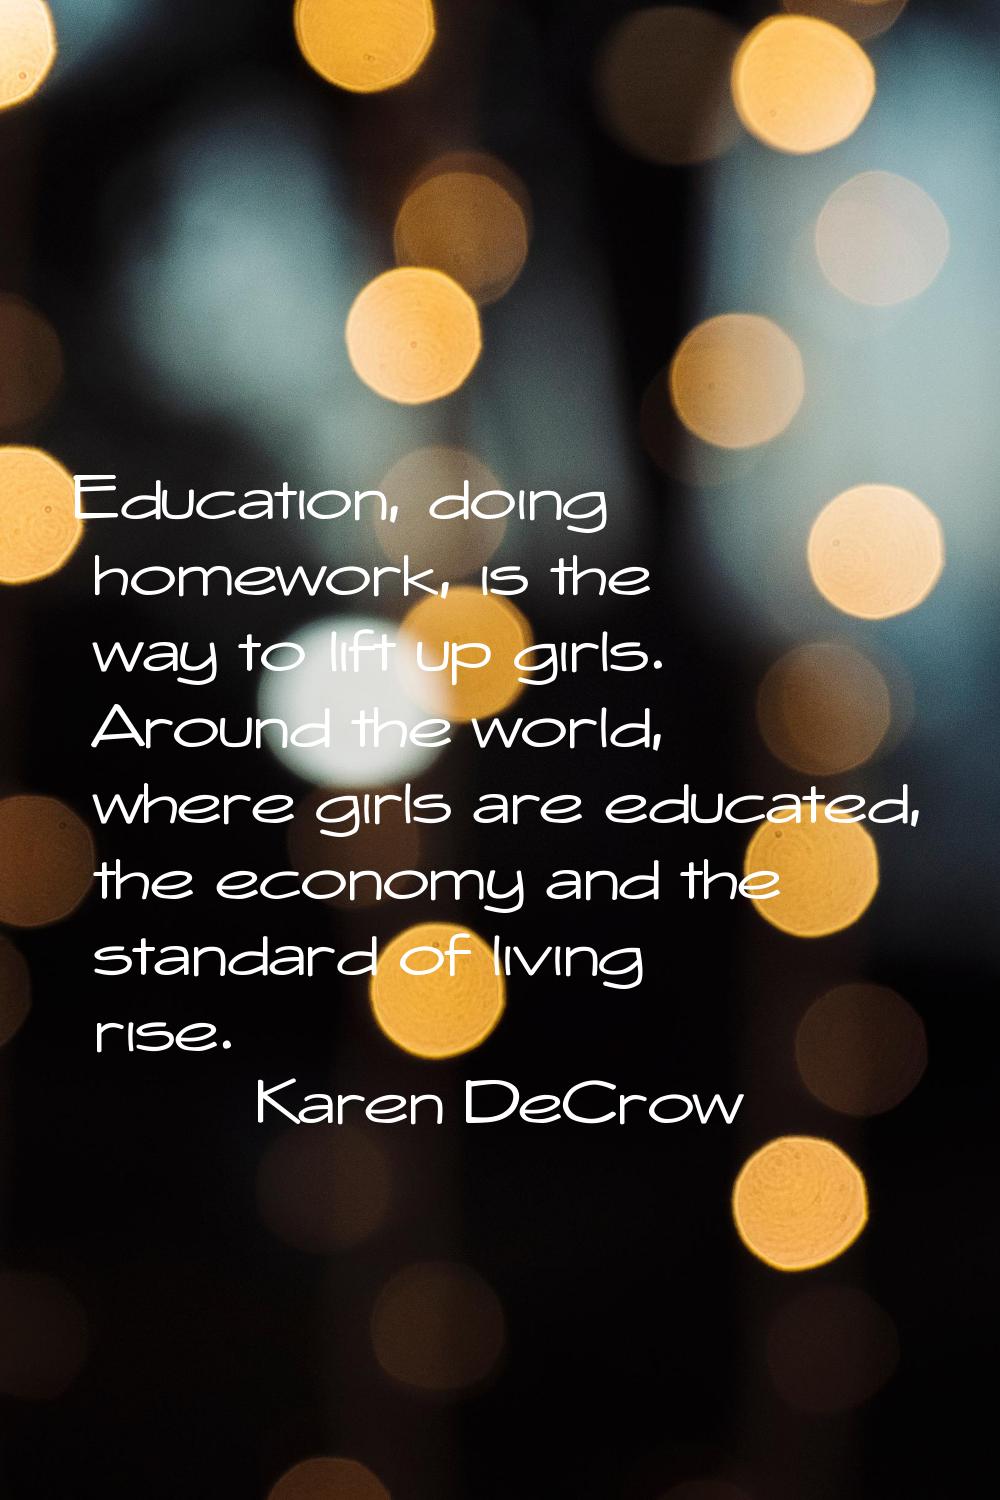 Education, doing homework, is the way to lift up girls. Around the world, where girls are educated,